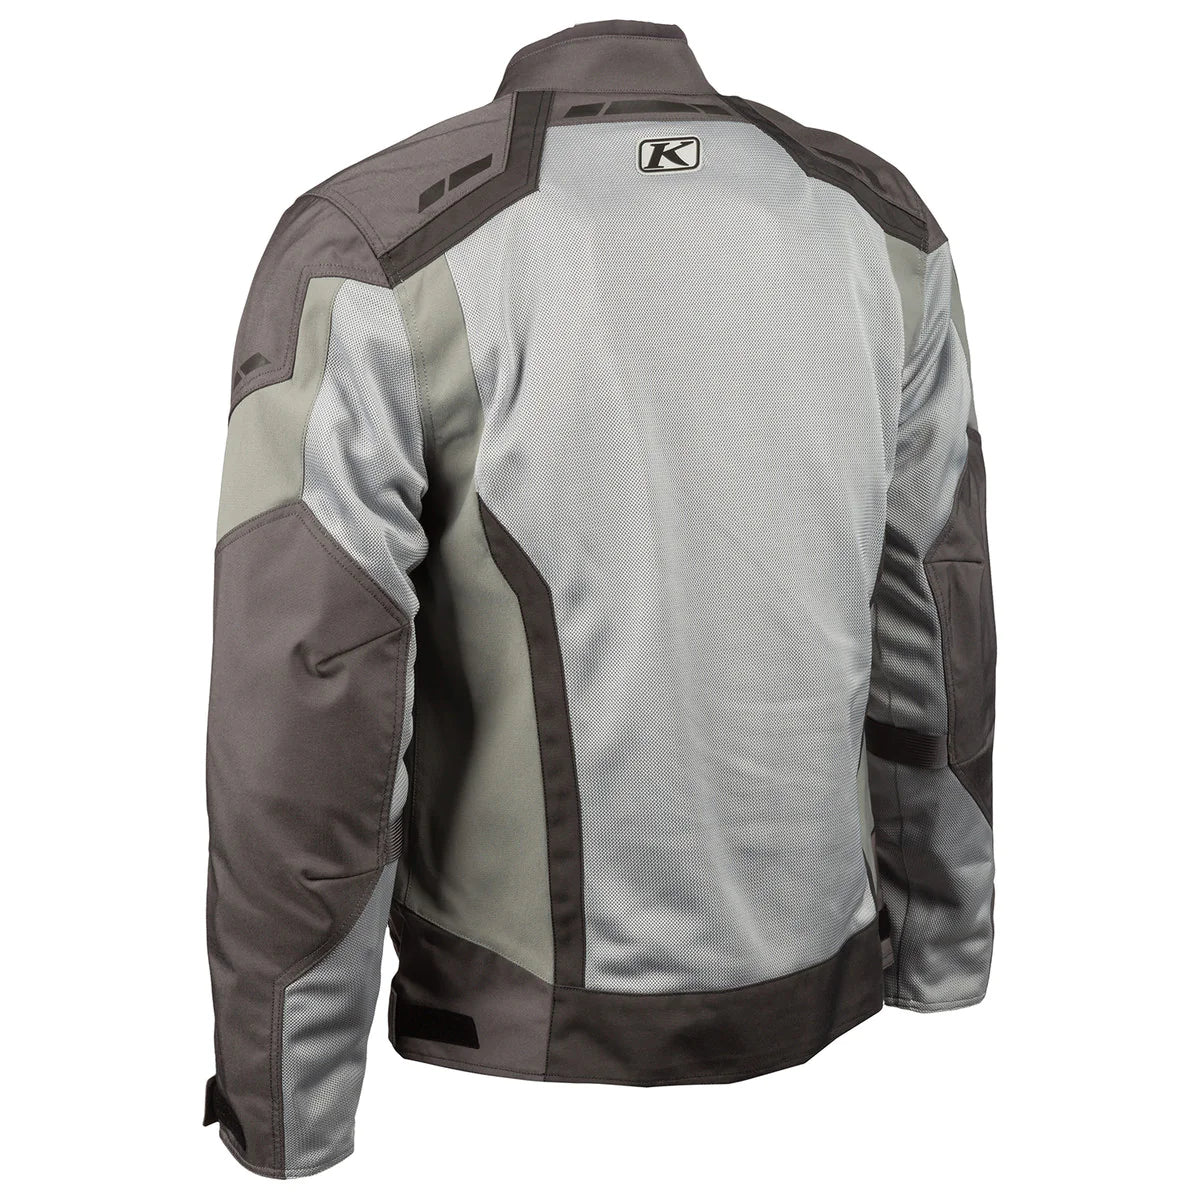 Klim Induction Cool Gray Jacket for motorcycle back left view